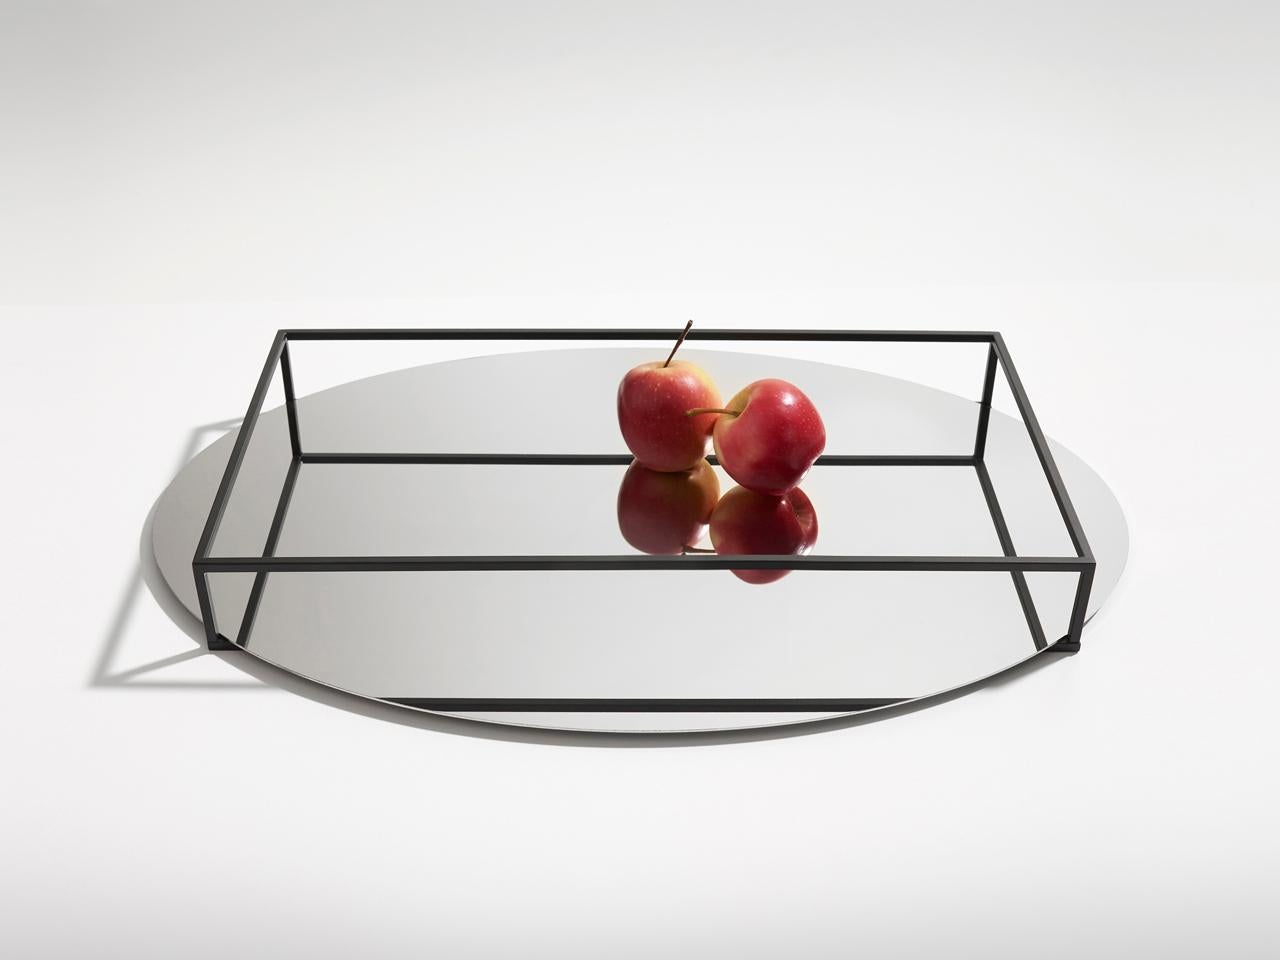 Surface e border no 2 is both a tray and a fruit bowl. The perimeter of the piece is made of thin lines of metal resting on an oval mirror. The combination of these elements creates a play of reflections that, to the eye, seems to alter the